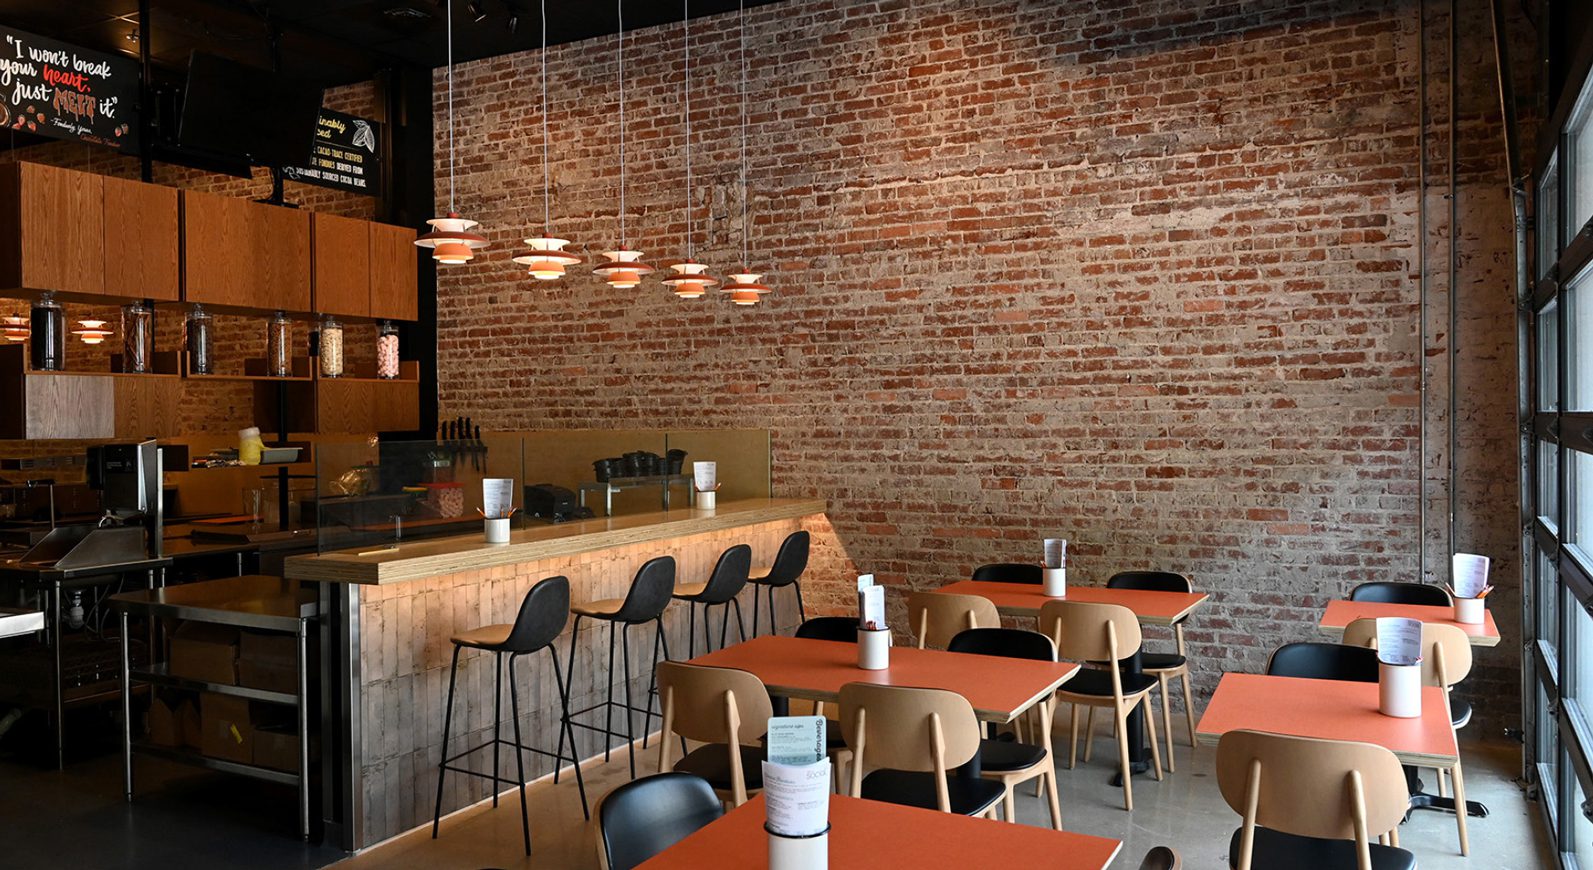 Interior photo of bar seating, exposed brick, and tables with chairs